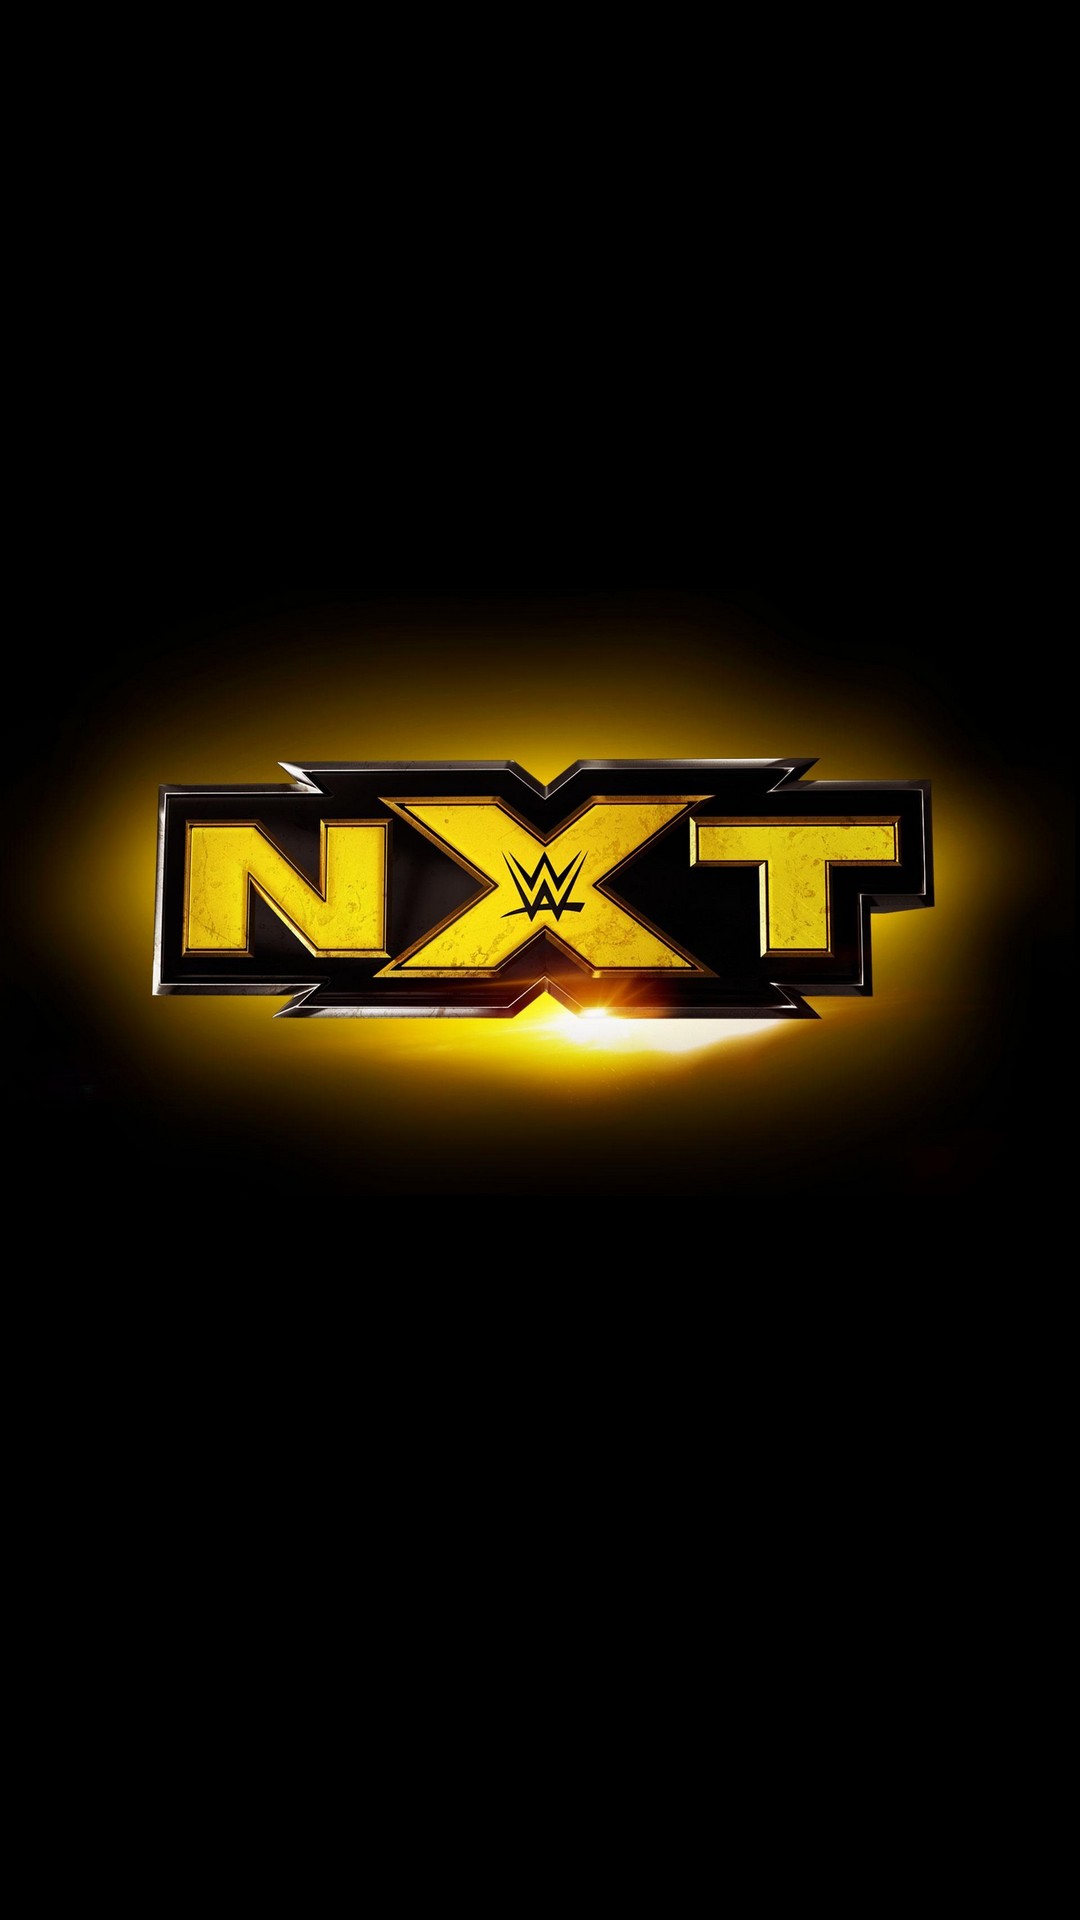 NXT WWE iPhone Wallpaper With high-resolution 1080X1920 pixel. You can use this wallpaper for your iPhone 5, 6, 7, 8, X, XS, XR backgrounds, Mobile Screensaver, or iPad Lock Screen